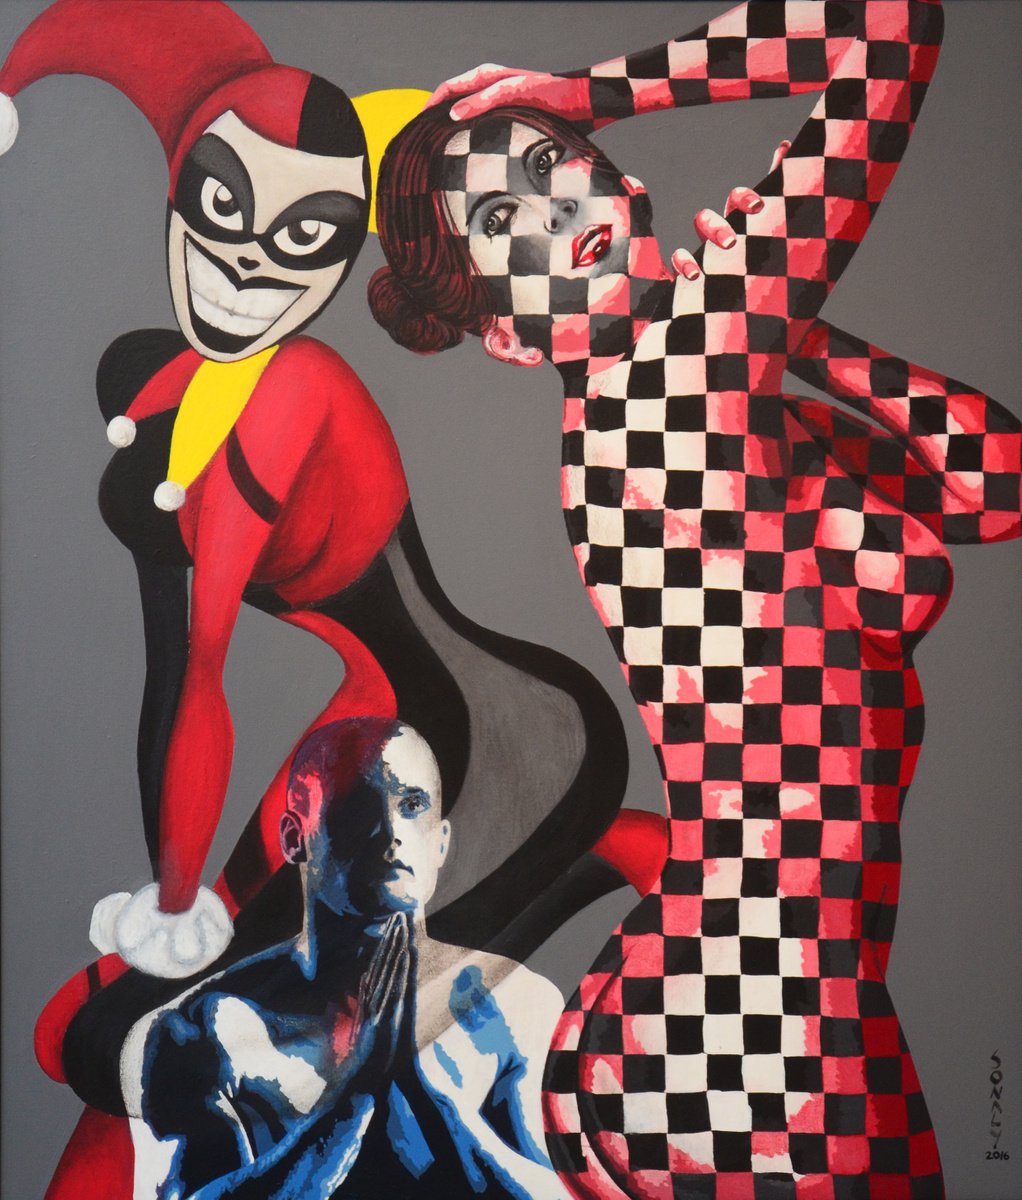 Couple and Joker by Sonaly Gandhi